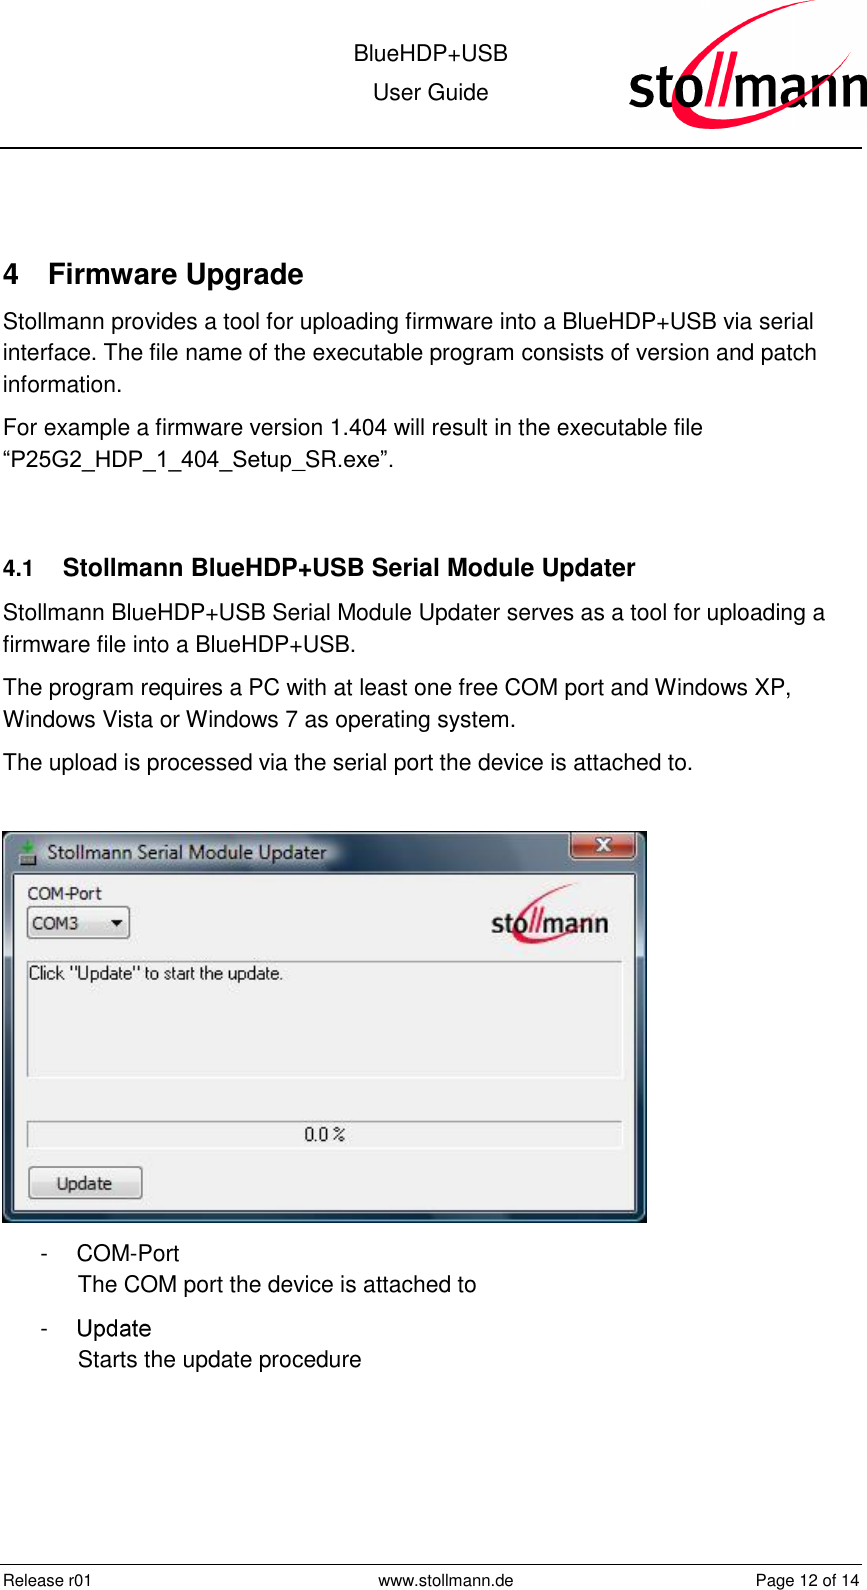  BlueHDP+USB User Guide  Release r01  www.stollmann.de  Page 12 of 14   4  Firmware Upgrade Stollmann provides a tool for uploading firmware into a BlueHDP+USB via serial interface. The file name of the executable program consists of version and patch information.  For example a firmware version 1.404 will result in the executable file “P25G2_HDP_1_404_Setup_SR.exe”.  4.1  Stollmann BlueHDP+USB Serial Module Updater Stollmann BlueHDP+USB Serial Module Updater serves as a tool for uploading a firmware file into a BlueHDP+USB. The program requires a PC with at least one free COM port and Windows XP, Windows Vista or Windows 7 as operating system. The upload is processed via the serial port the device is attached to.   -  COM-Port The COM port the device is attached to -   Starts the update procedure 